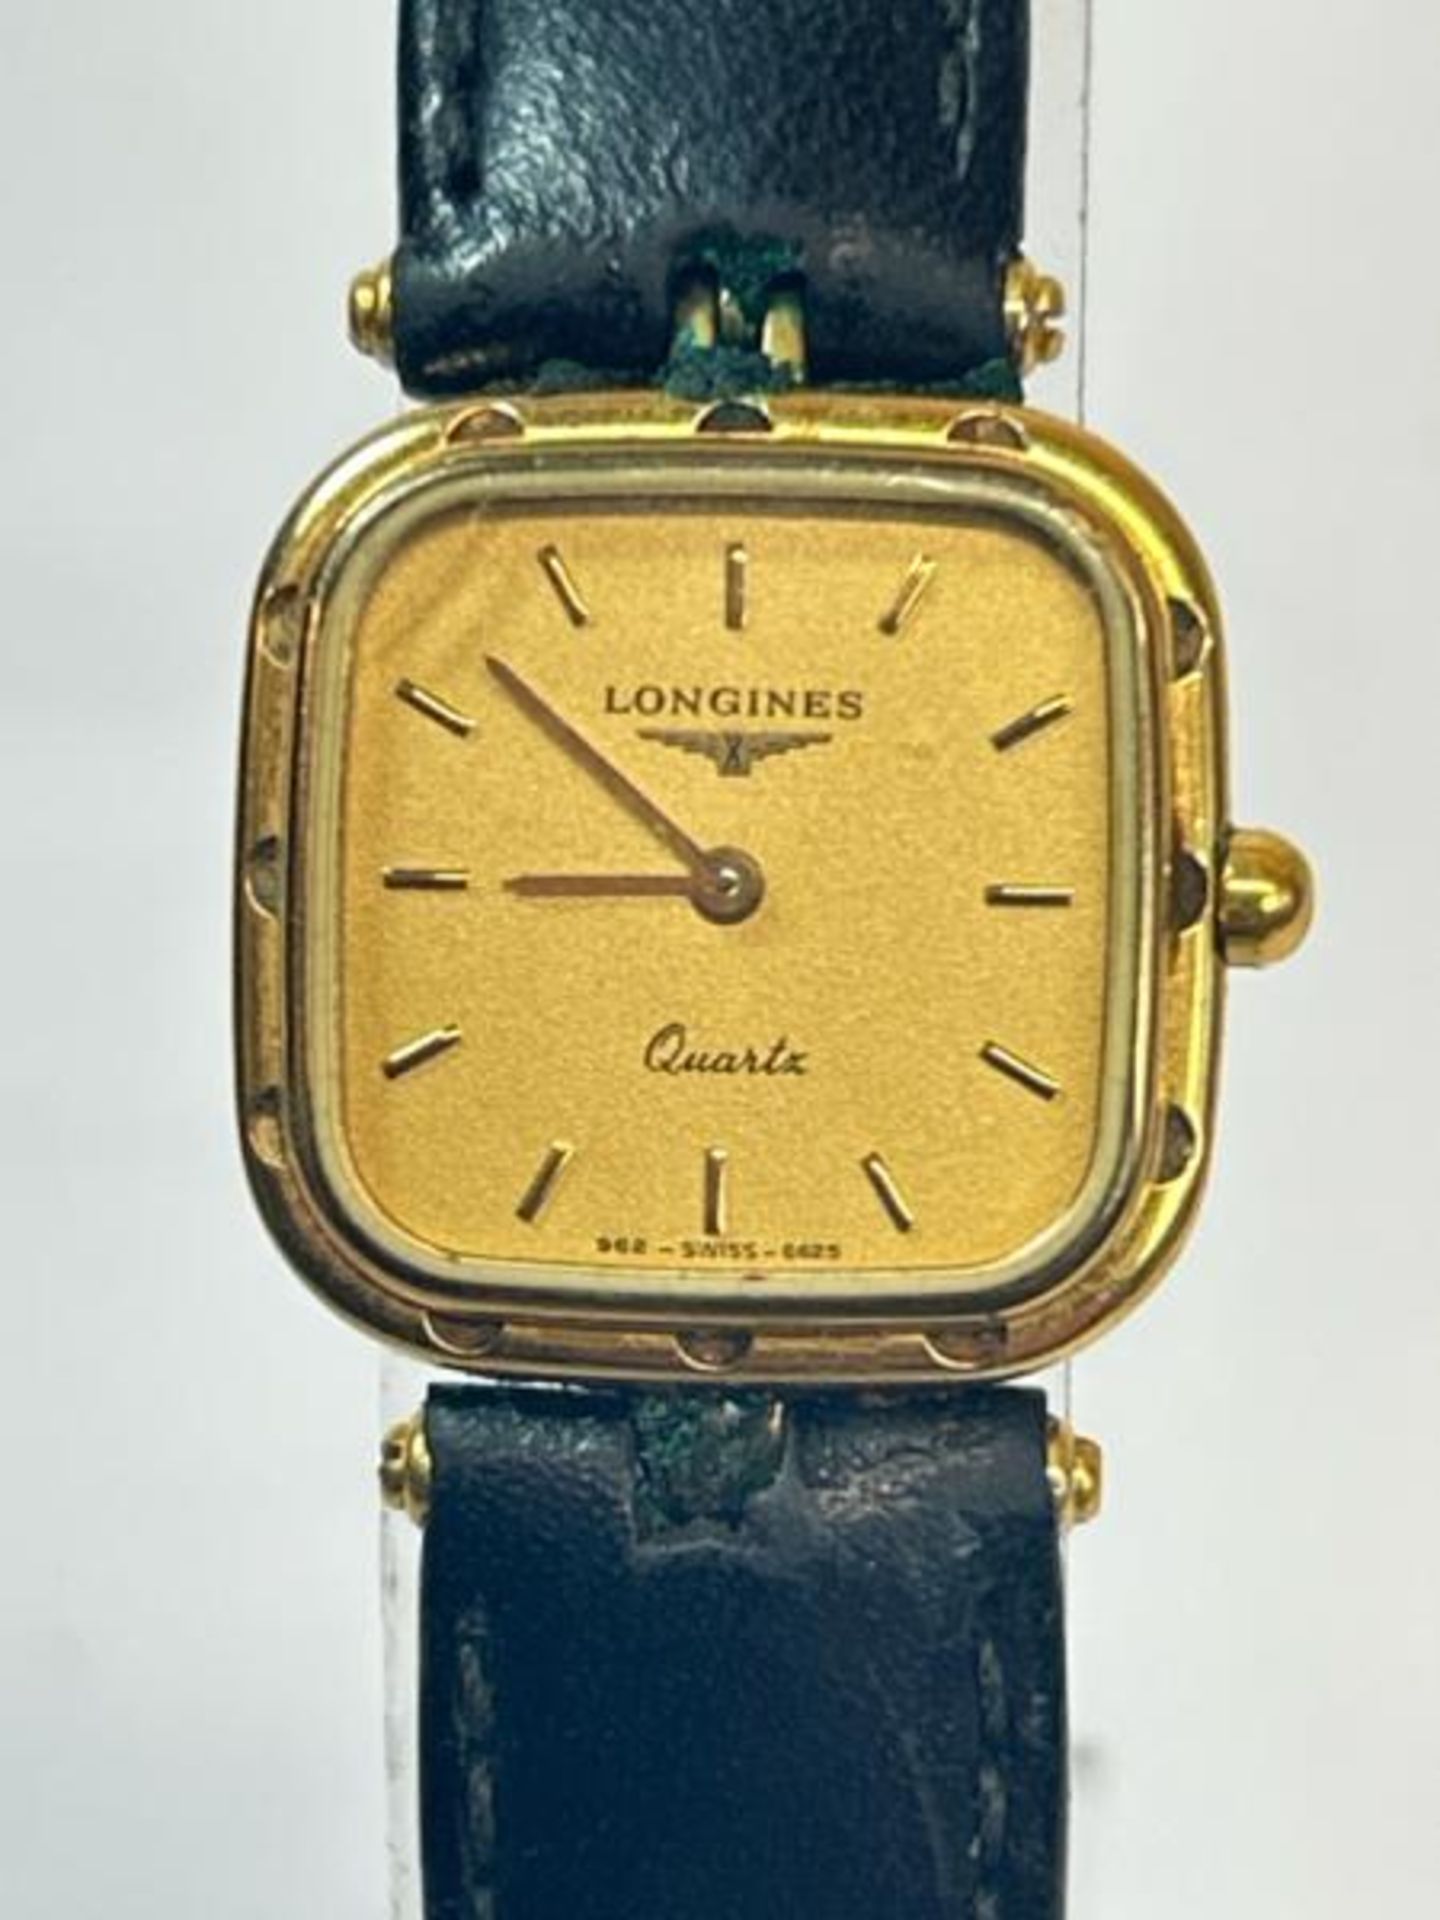 Vintage Longines gold plated wristwatch no.21712443 with quartz movement on black leather strap / SF